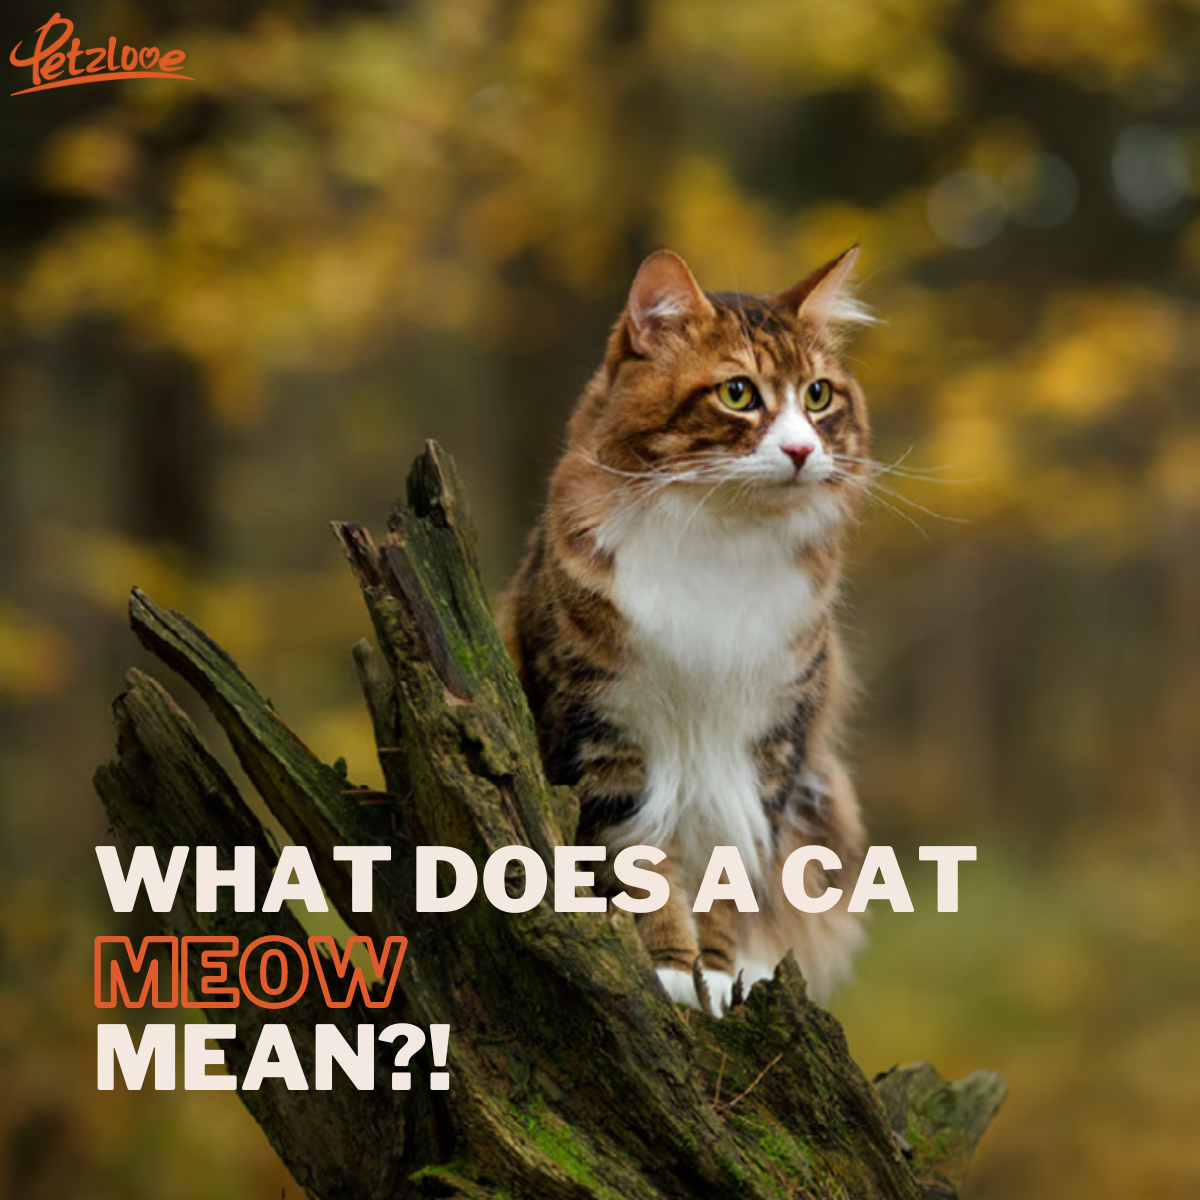 What Does a Cat Meow Mean?! – Petzlove